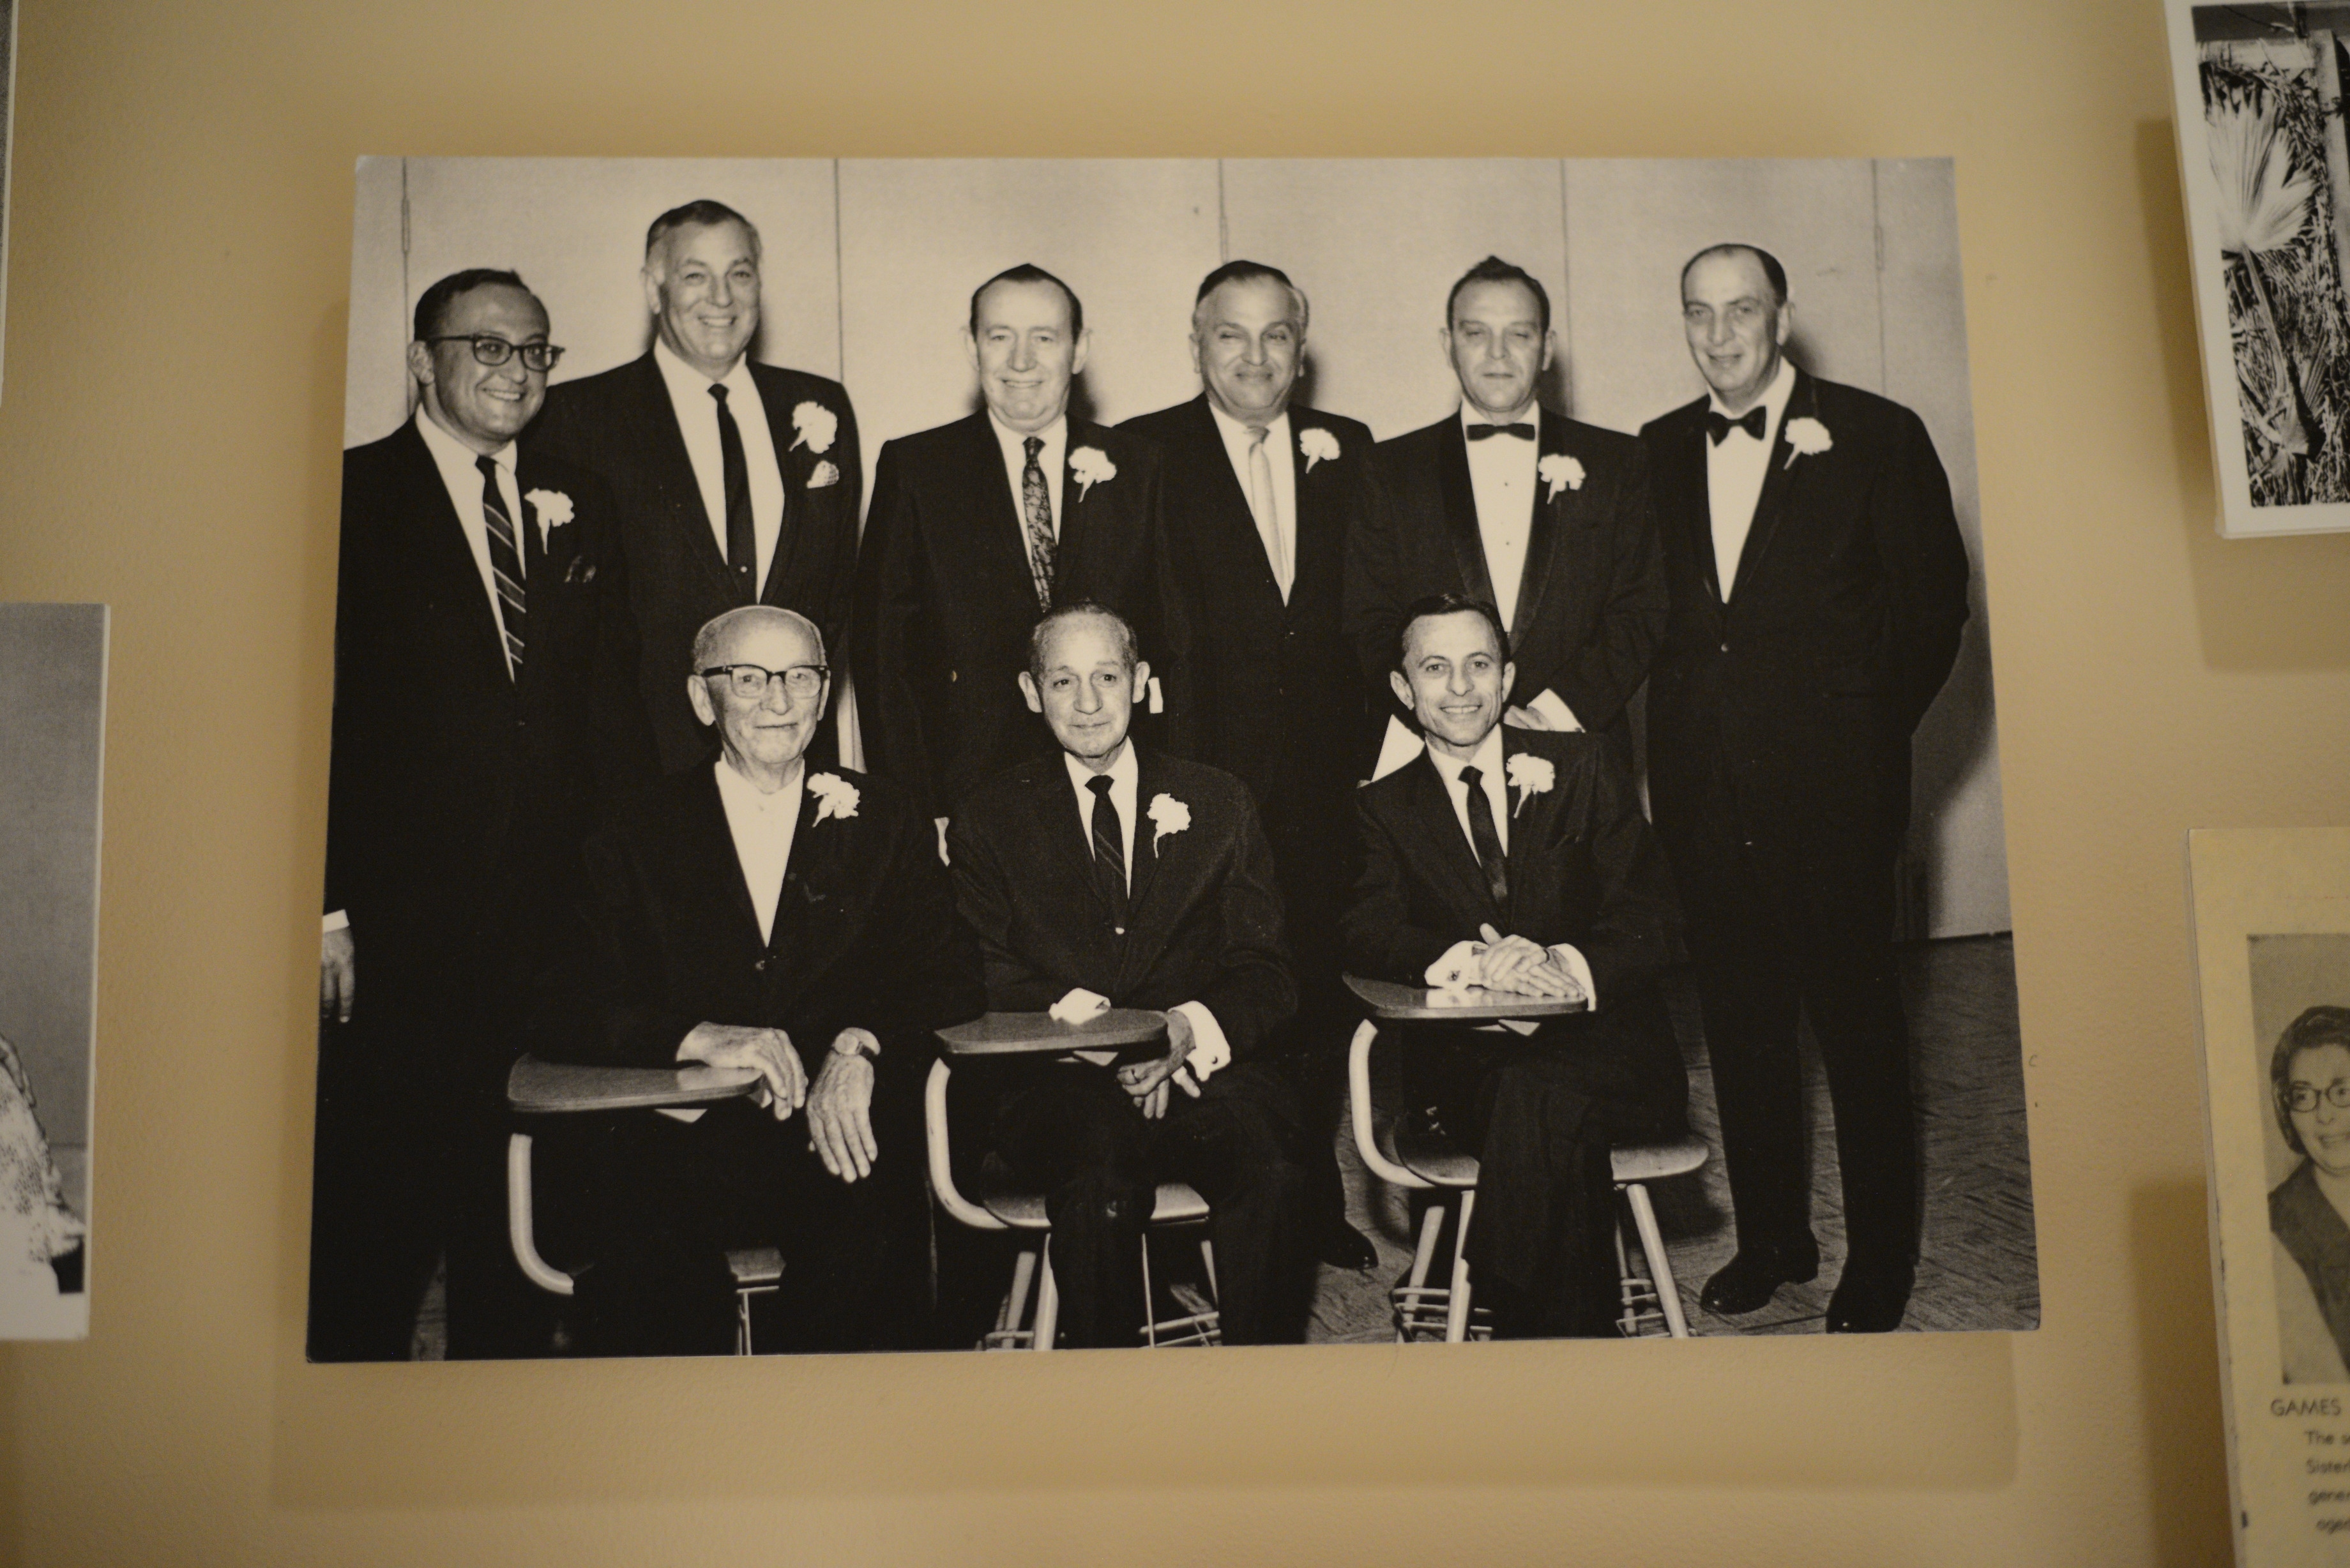 Photograph of past presidents of Temple Beth Sholom, approximately 1978